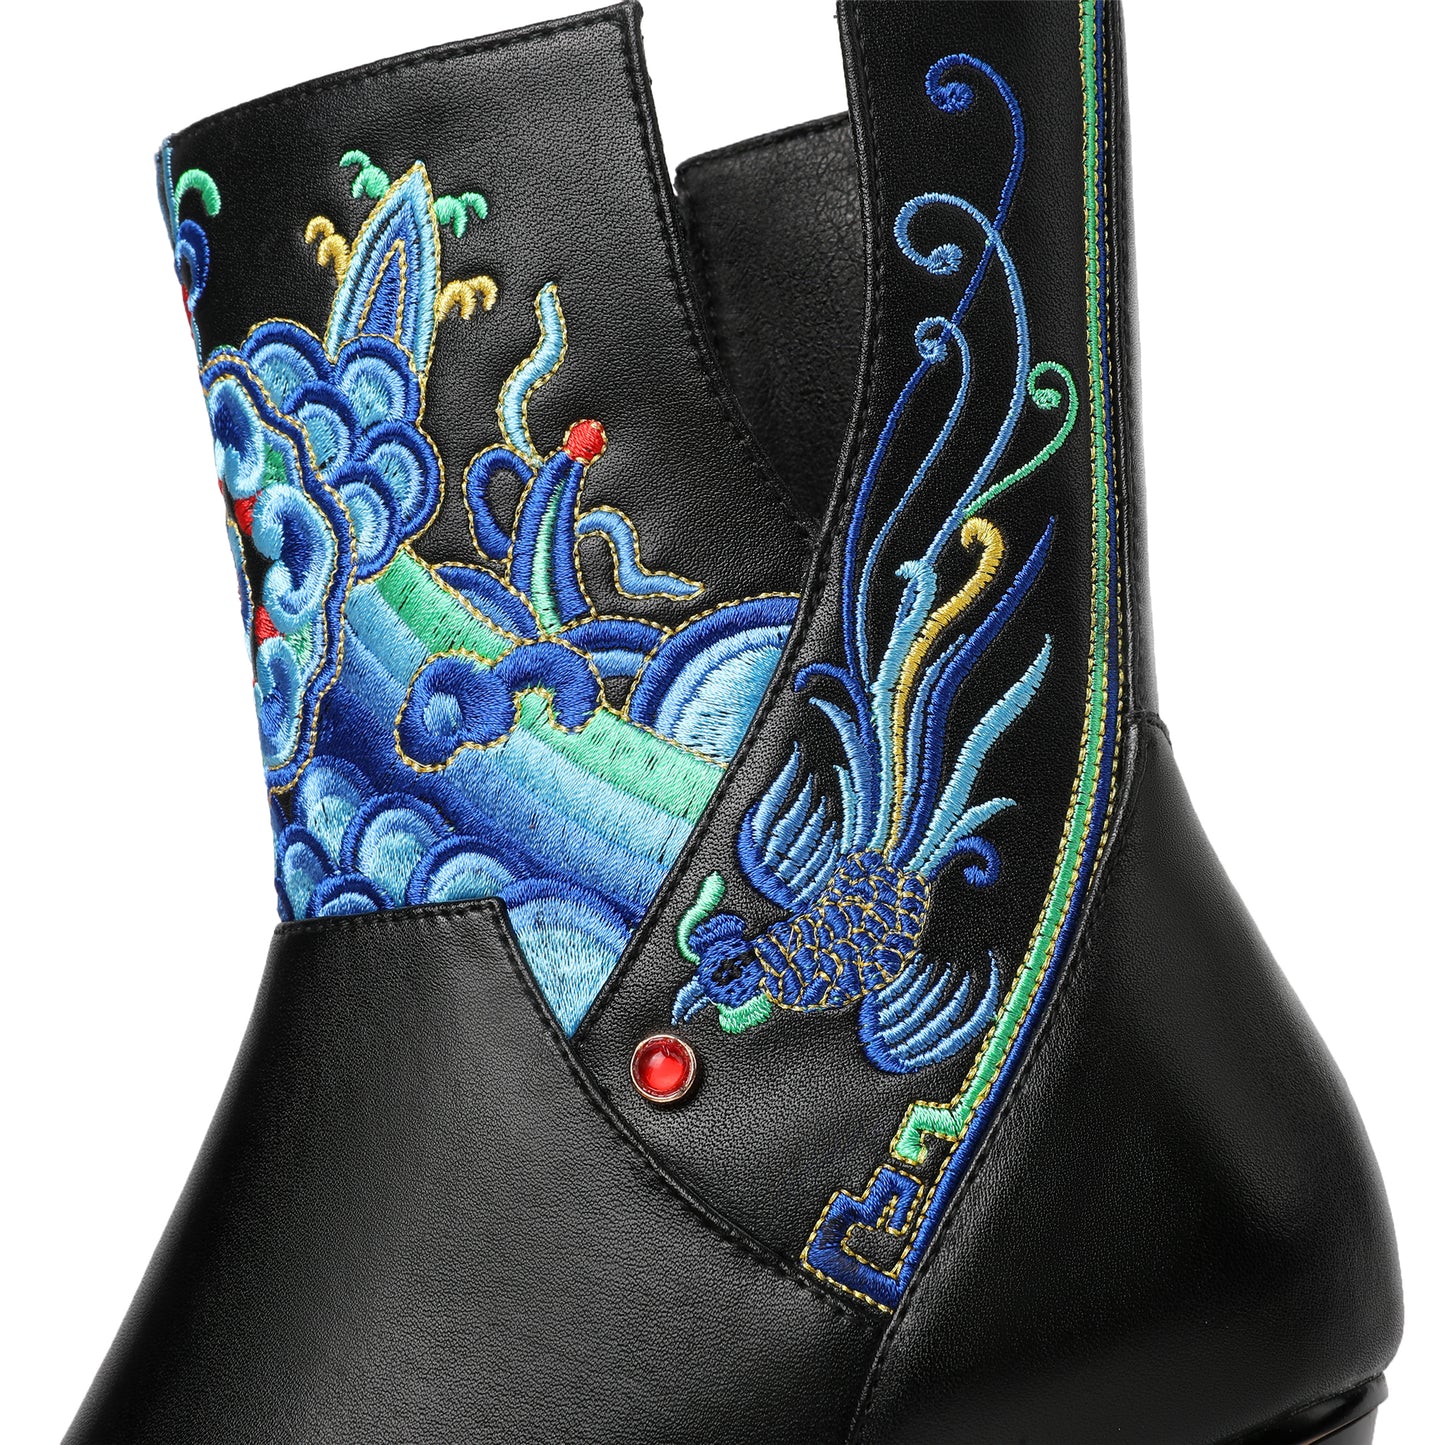 TinaCus Handmade Women's Genuine Leather Ethnic Embroidered Pointed Toe Low Chunky Heel Side Zipper Mid-Calf Boots